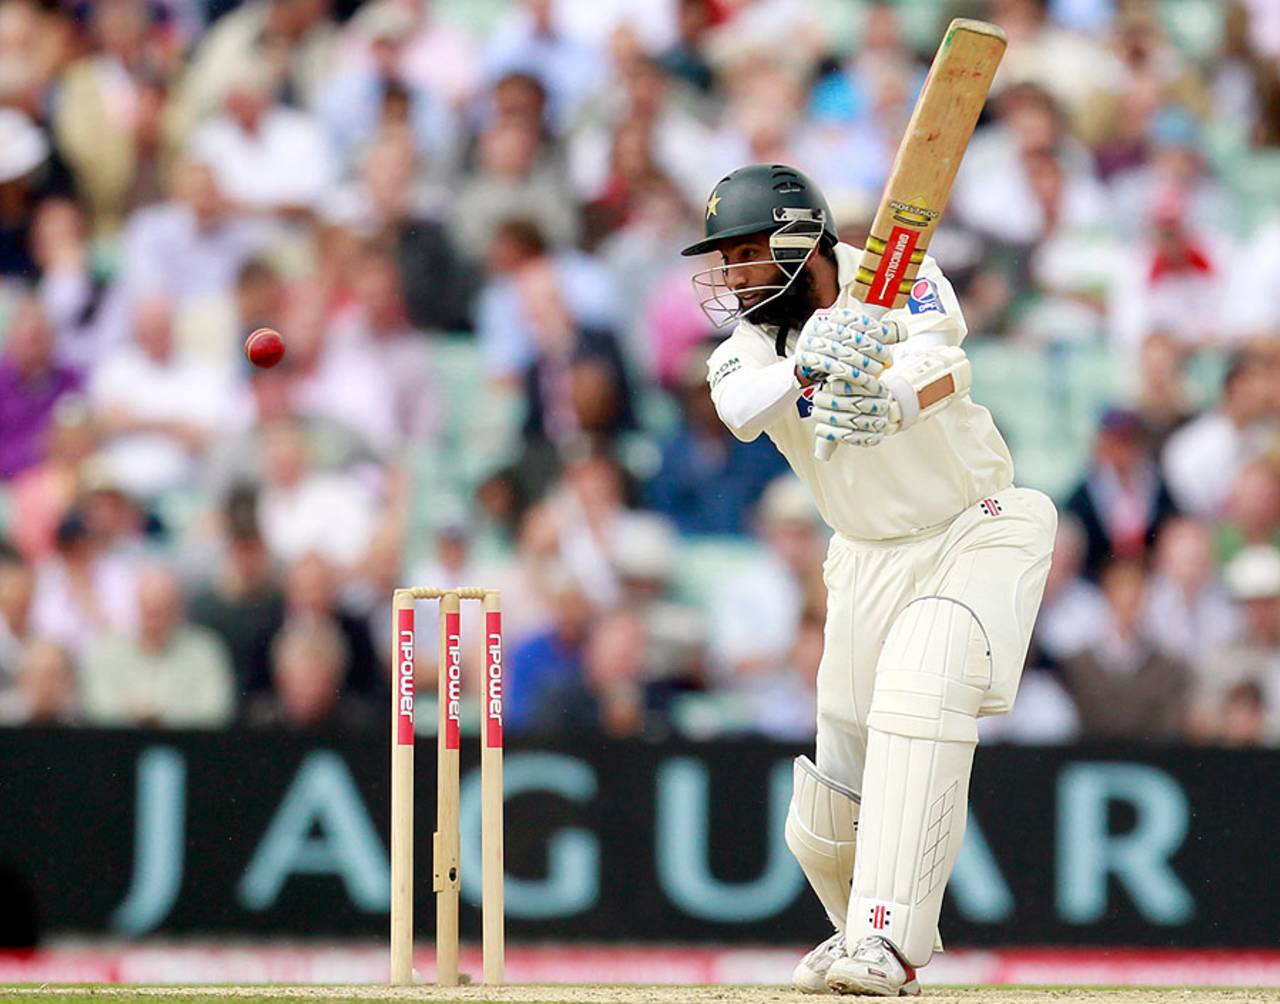 Mohammad Yousuf averages 54.33 in England but that number is explained away as a one-series wonder&nbsp;&nbsp;&bull;&nbsp;&nbsp;Associated Press